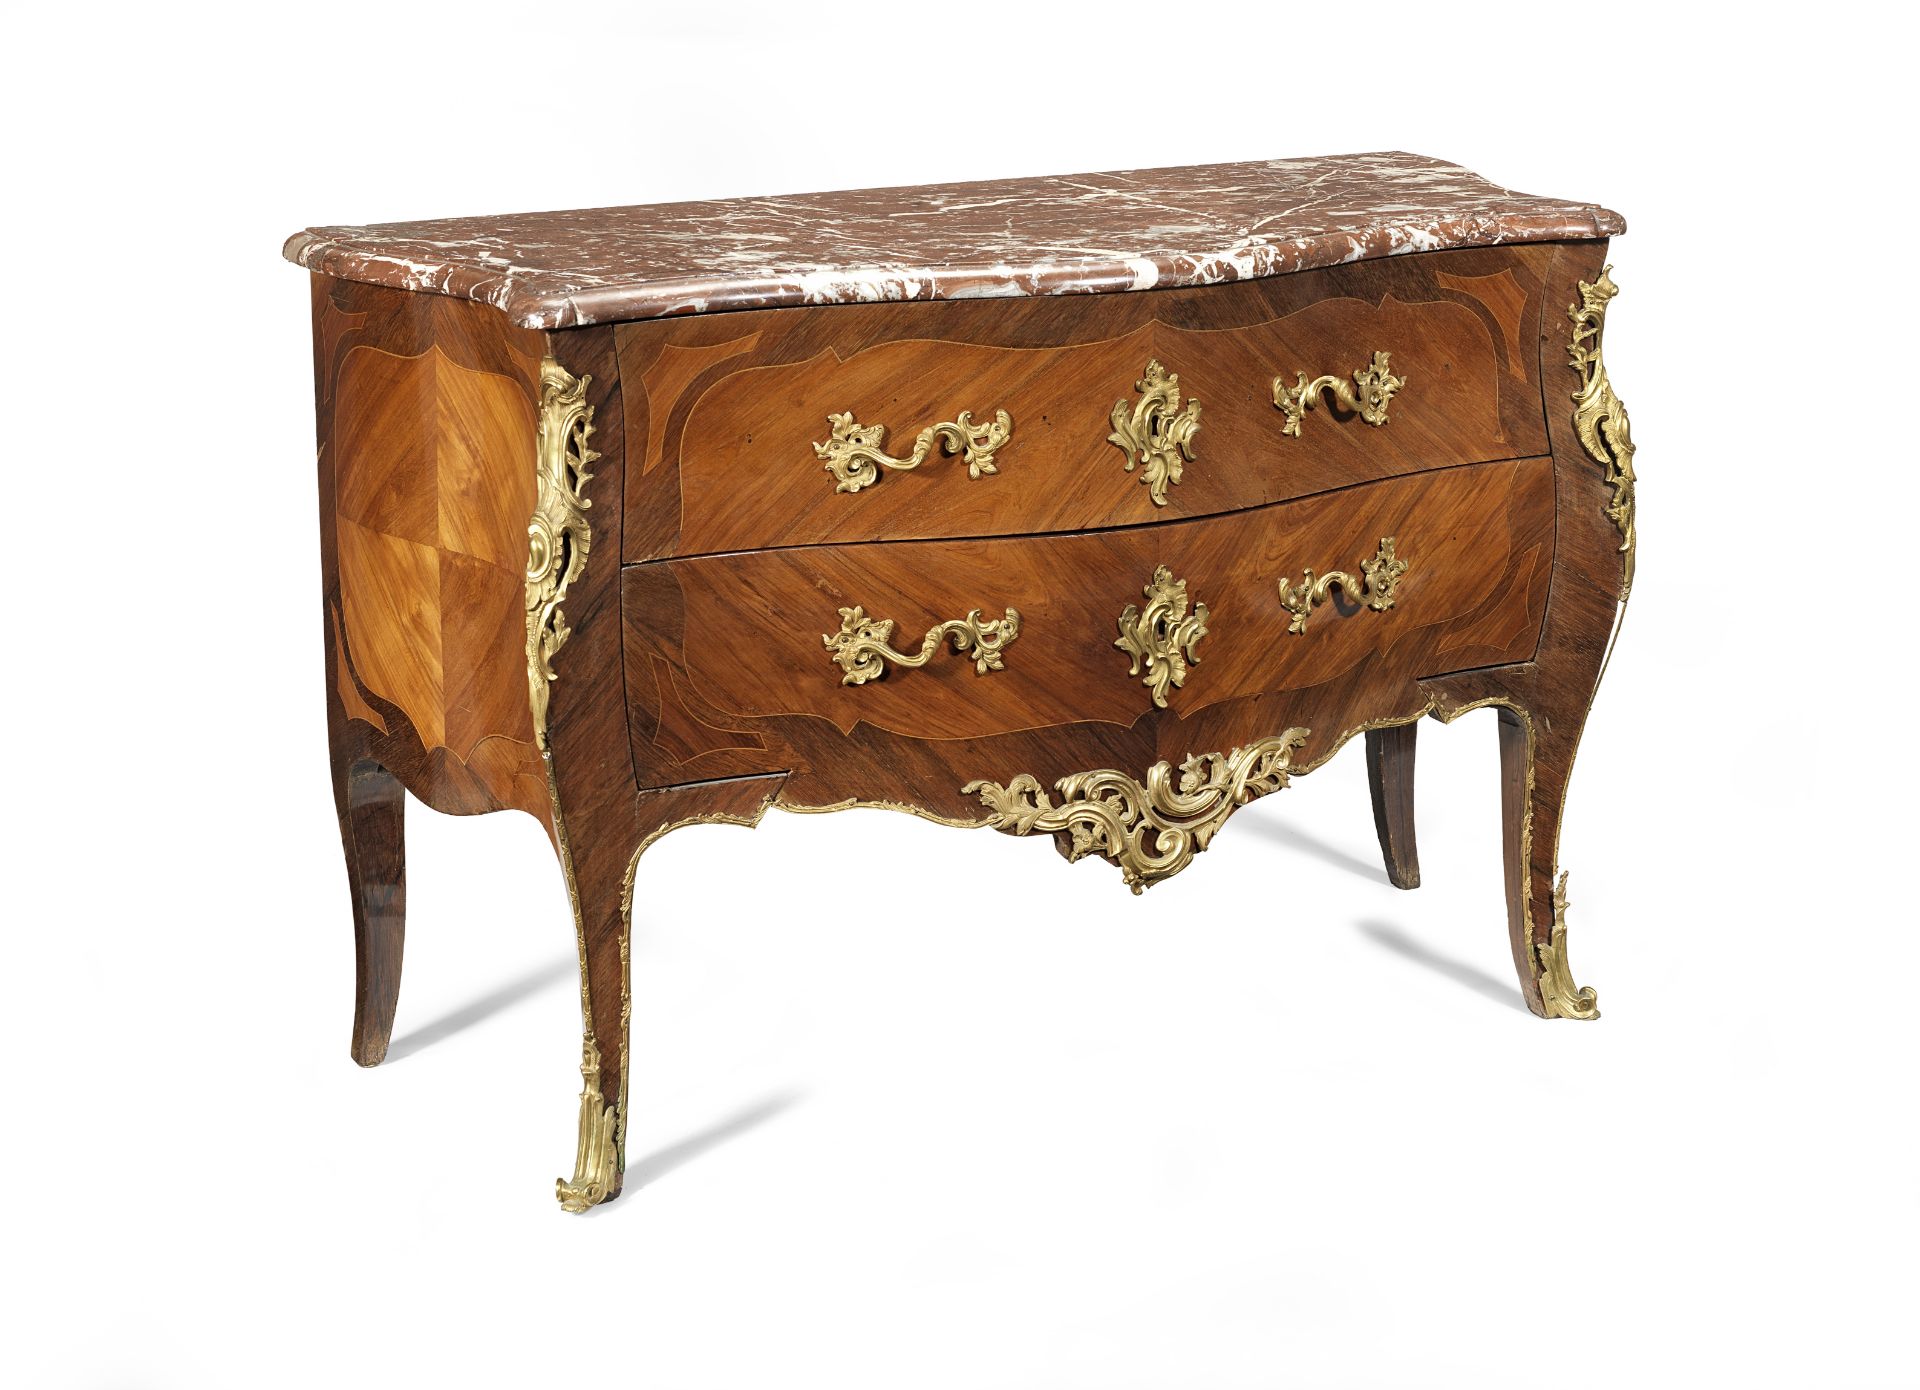 A Louis XV ormolu mounted tulipwood and rosewood serpentine commode